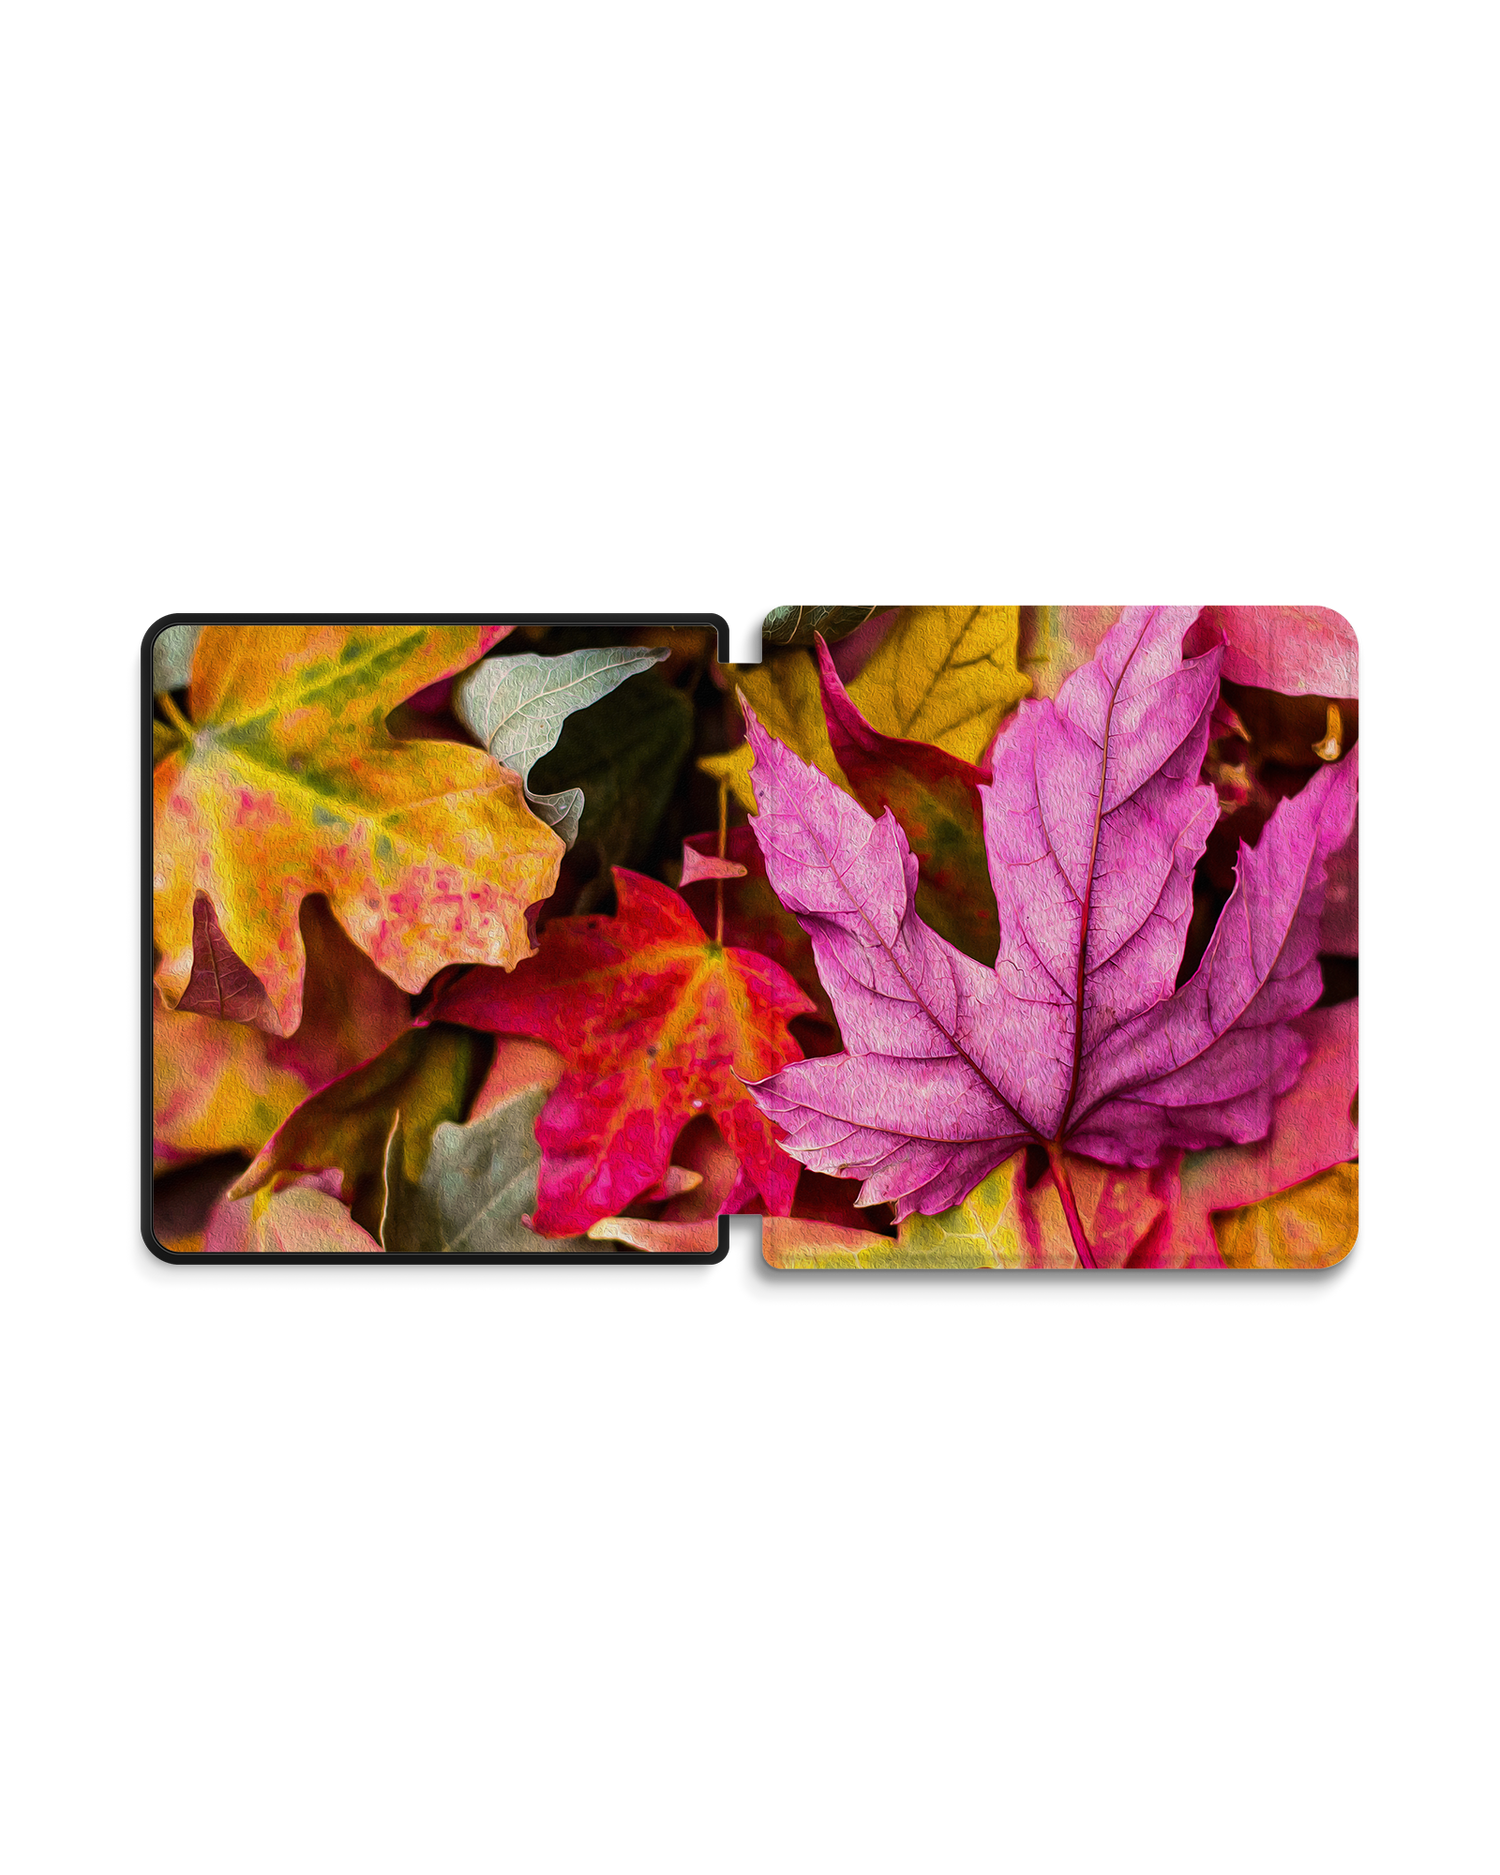 Autumn Leaves eReader Smart Case for tolino epos 2: Opened exterior view